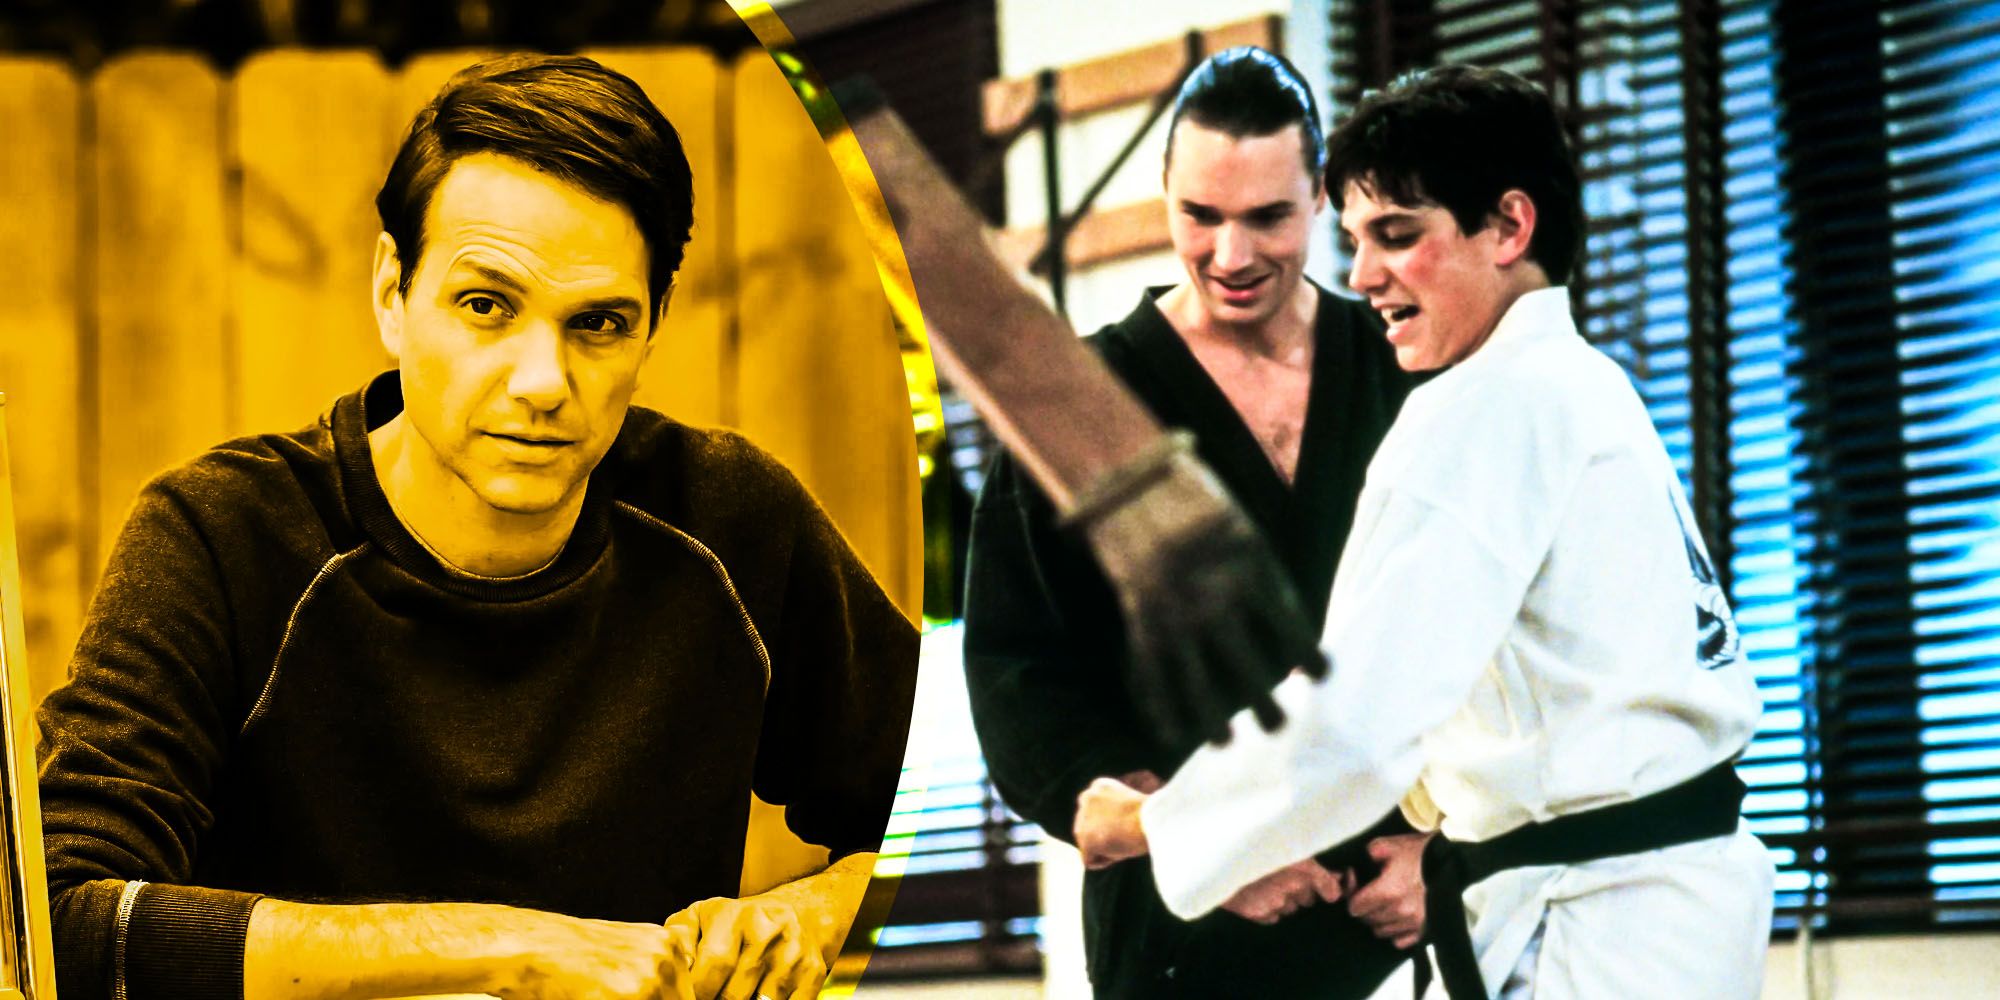 Everyone on Set Hated 'the Karate Kid' Title While Making the Movie